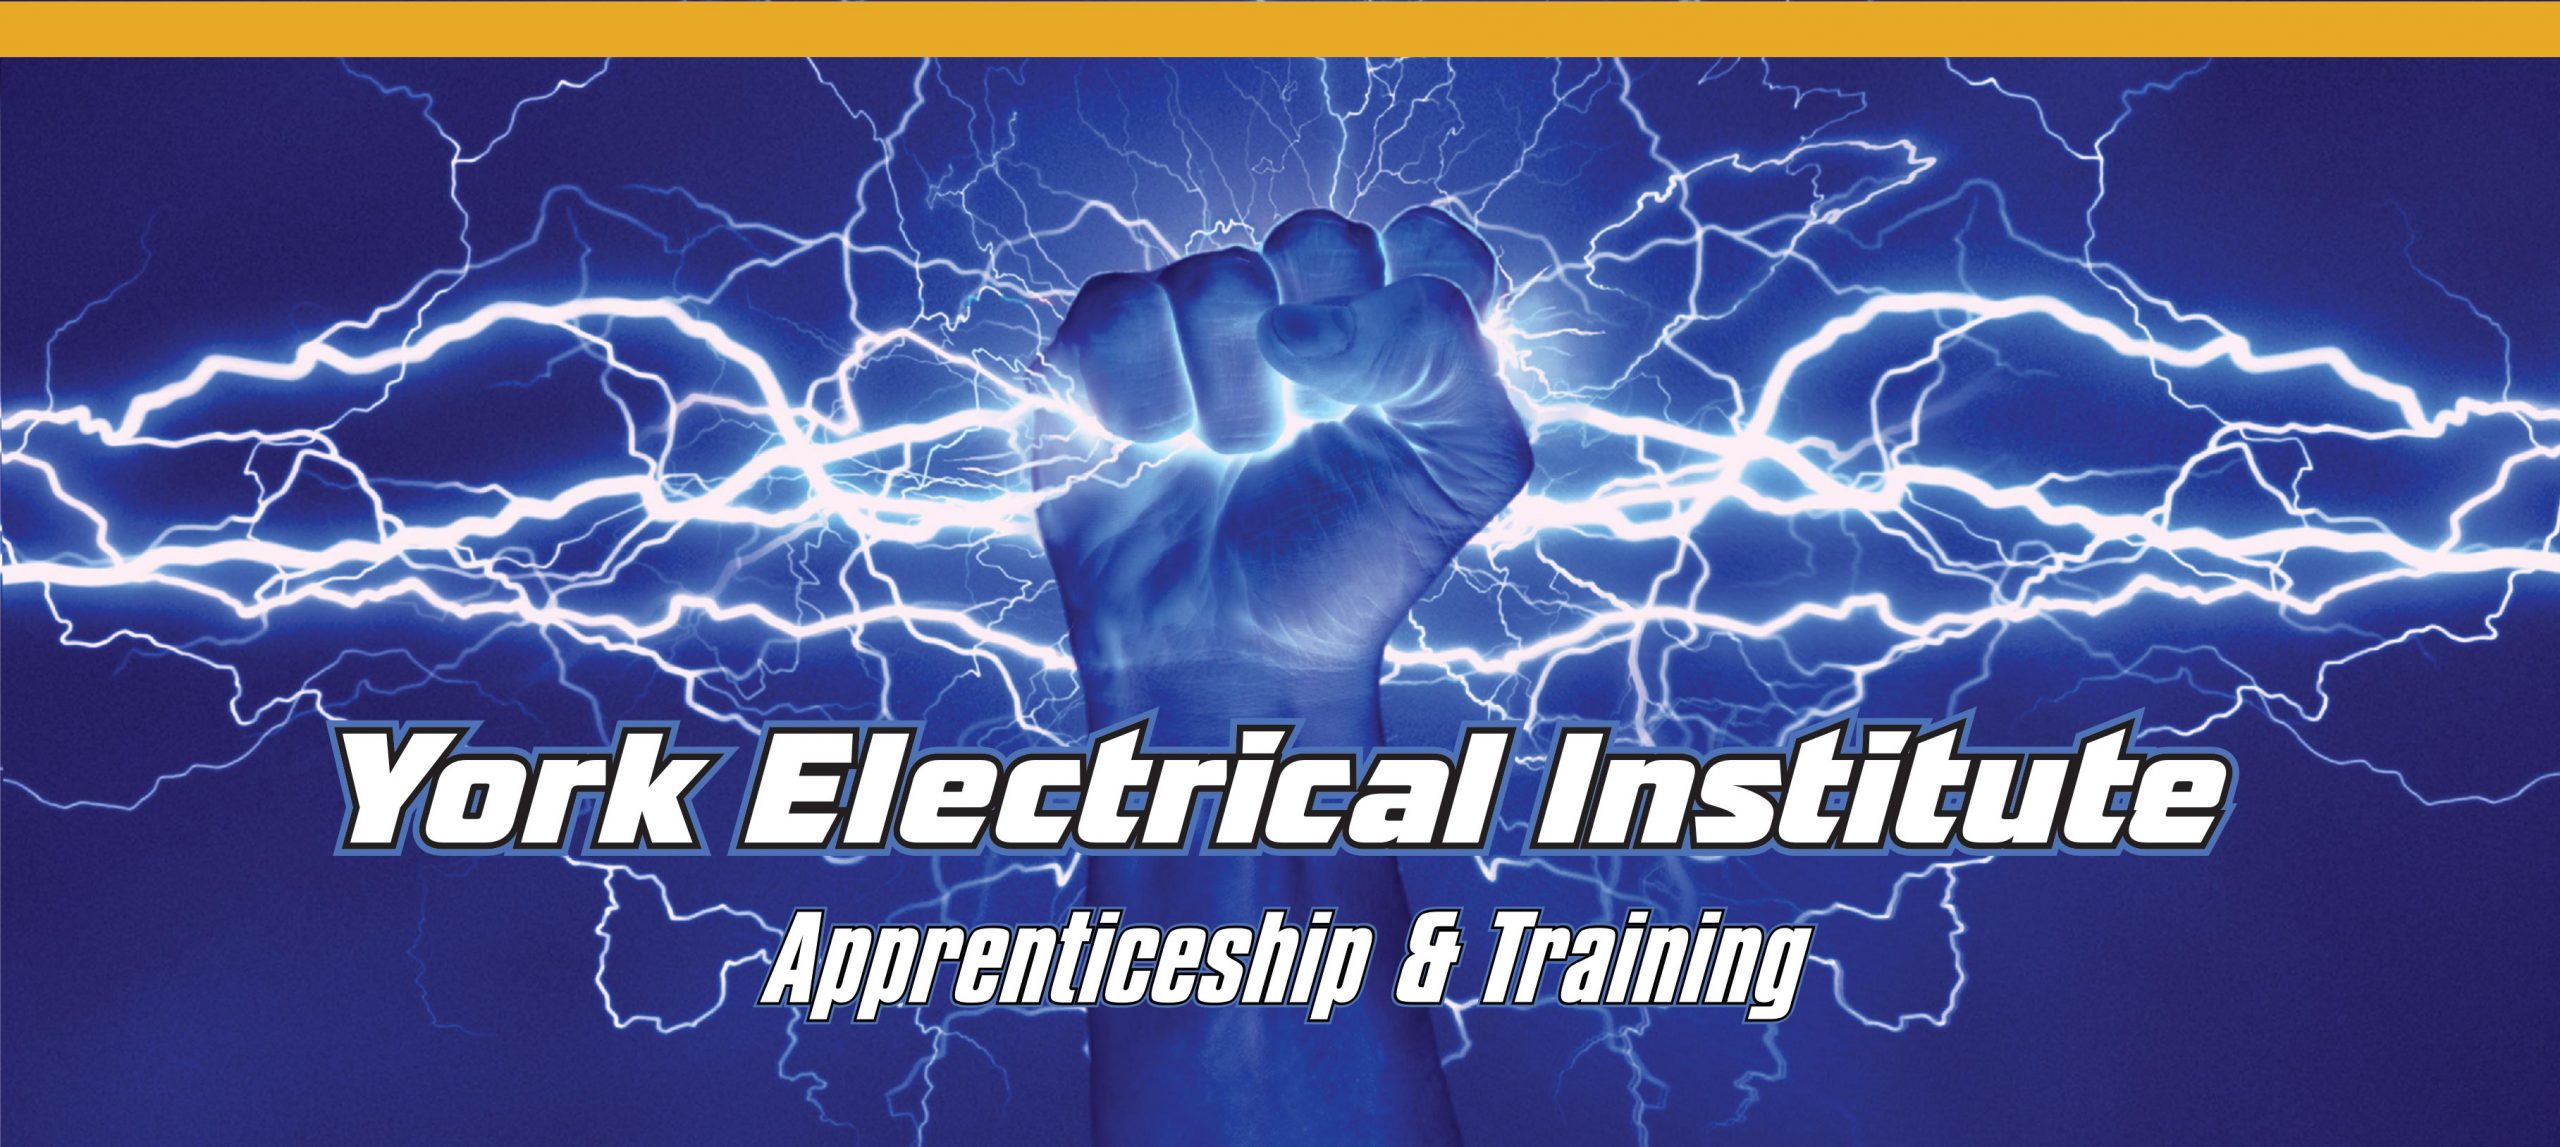 york electrical institute accredited apprenticeship and training